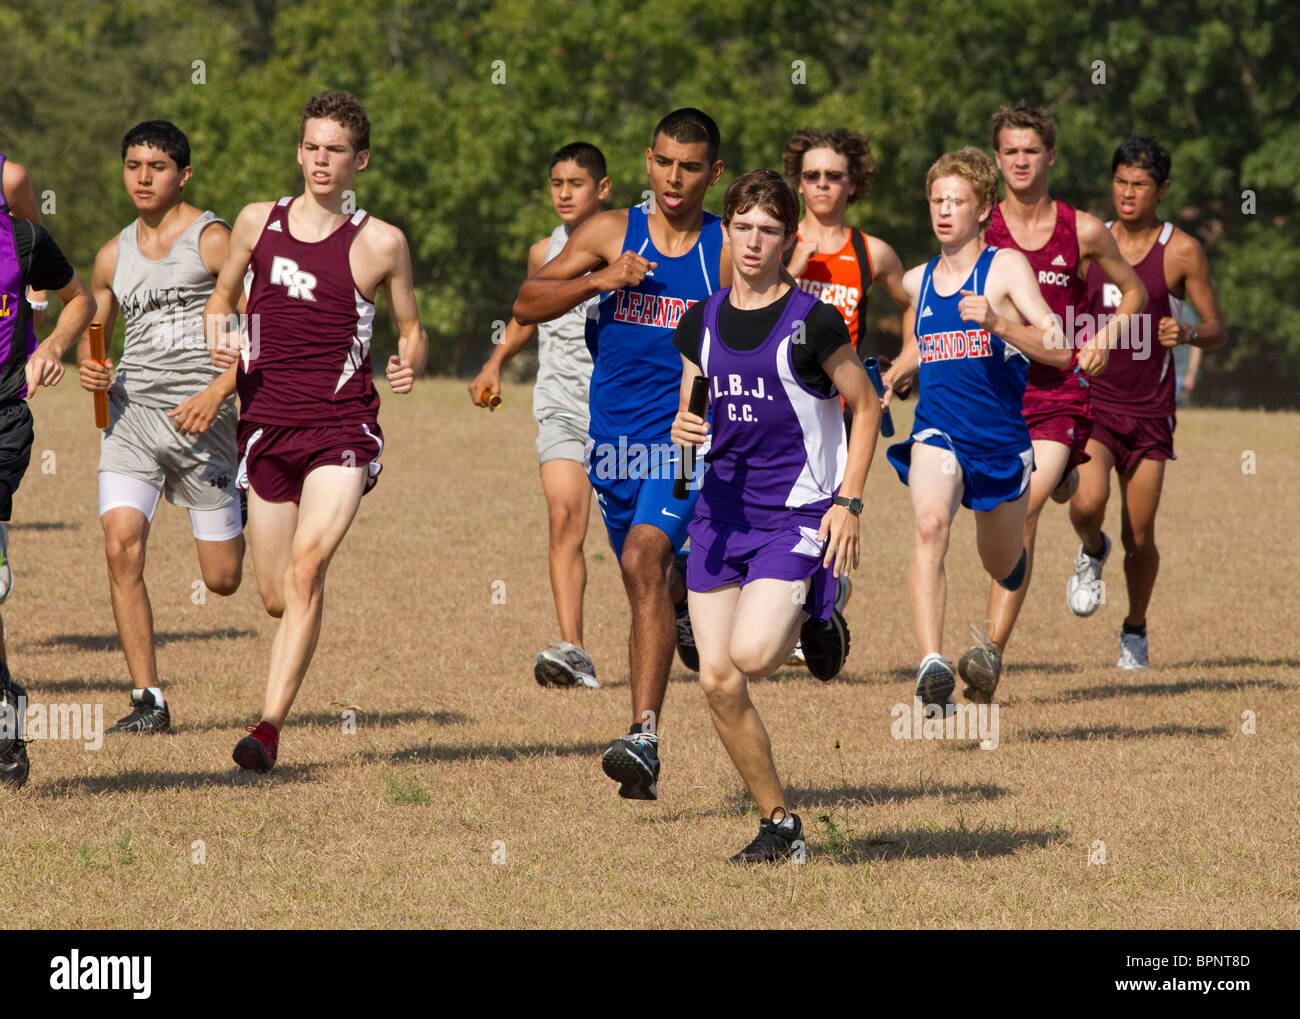 Pflugerville Texas USA, August 27 2010: Athletes from different high schools compete at a high school cross country meet at city park. ©Bob Daemmrich Stock Photo